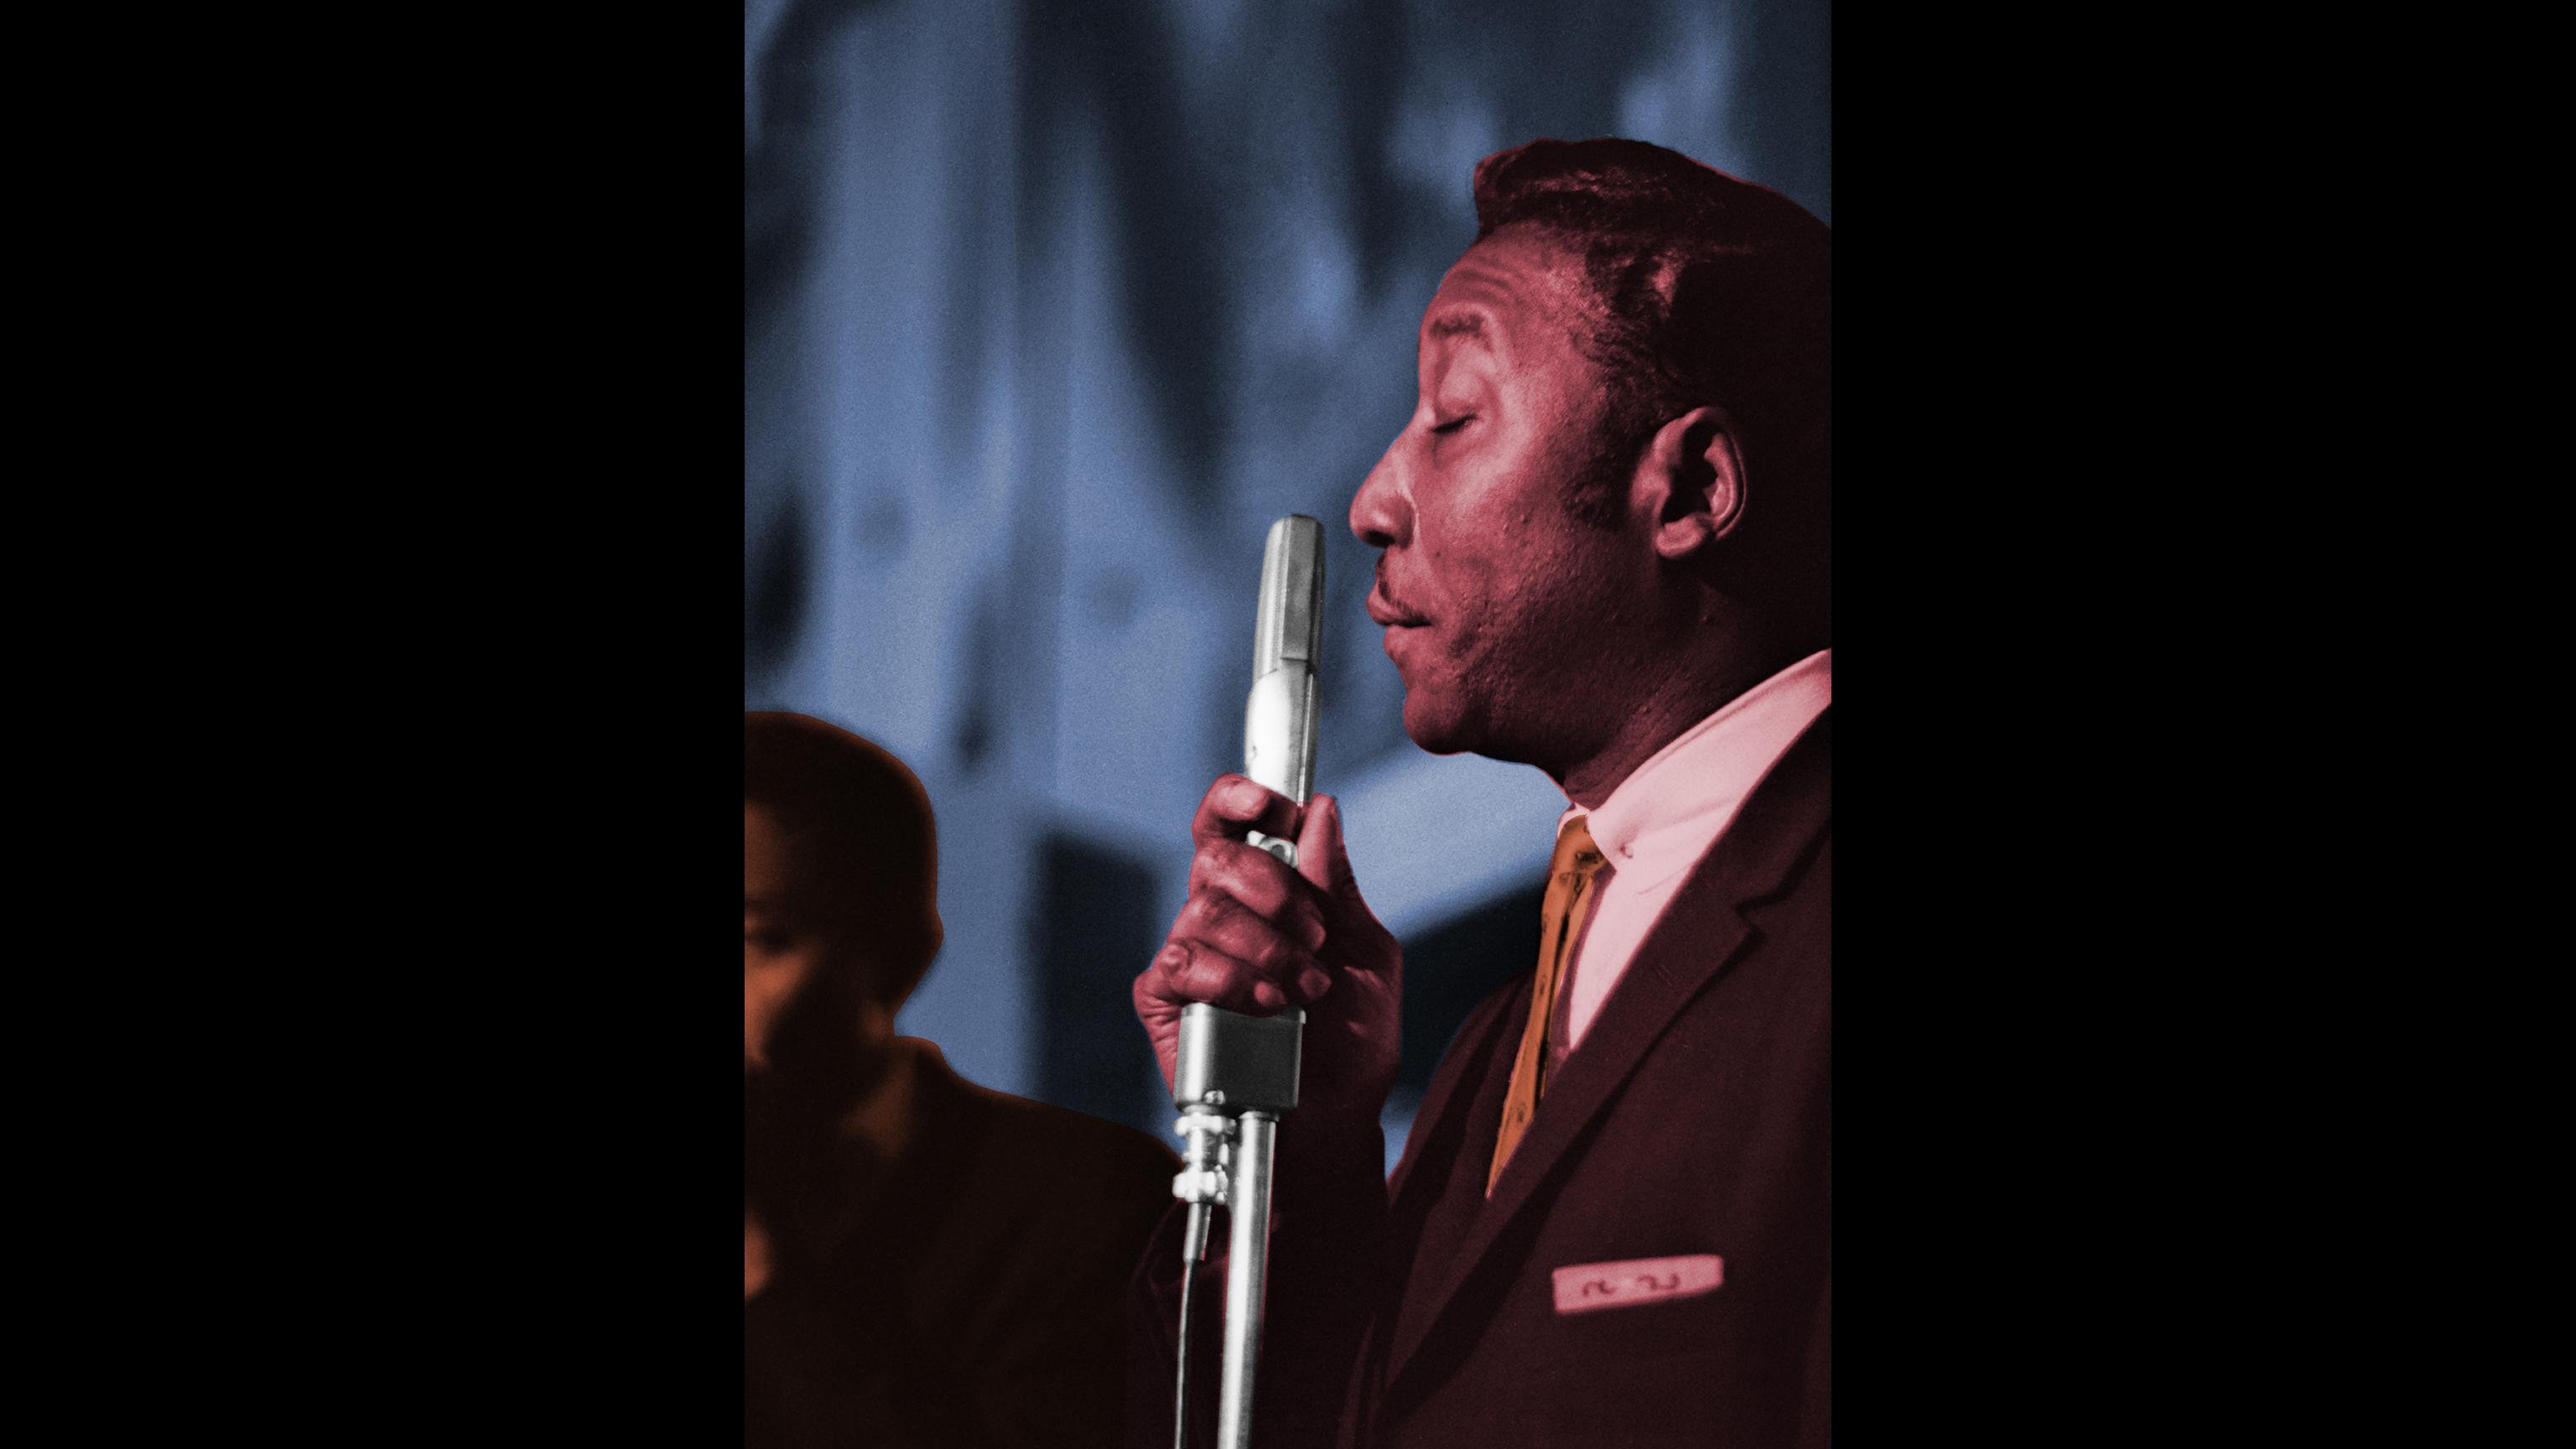 Muddy Waters performing at Pepper’s Lounge in Chicago, 43rd and Vincennes, 1961. Raeburn Flerlage image, colorized. (Chicago History Museum)